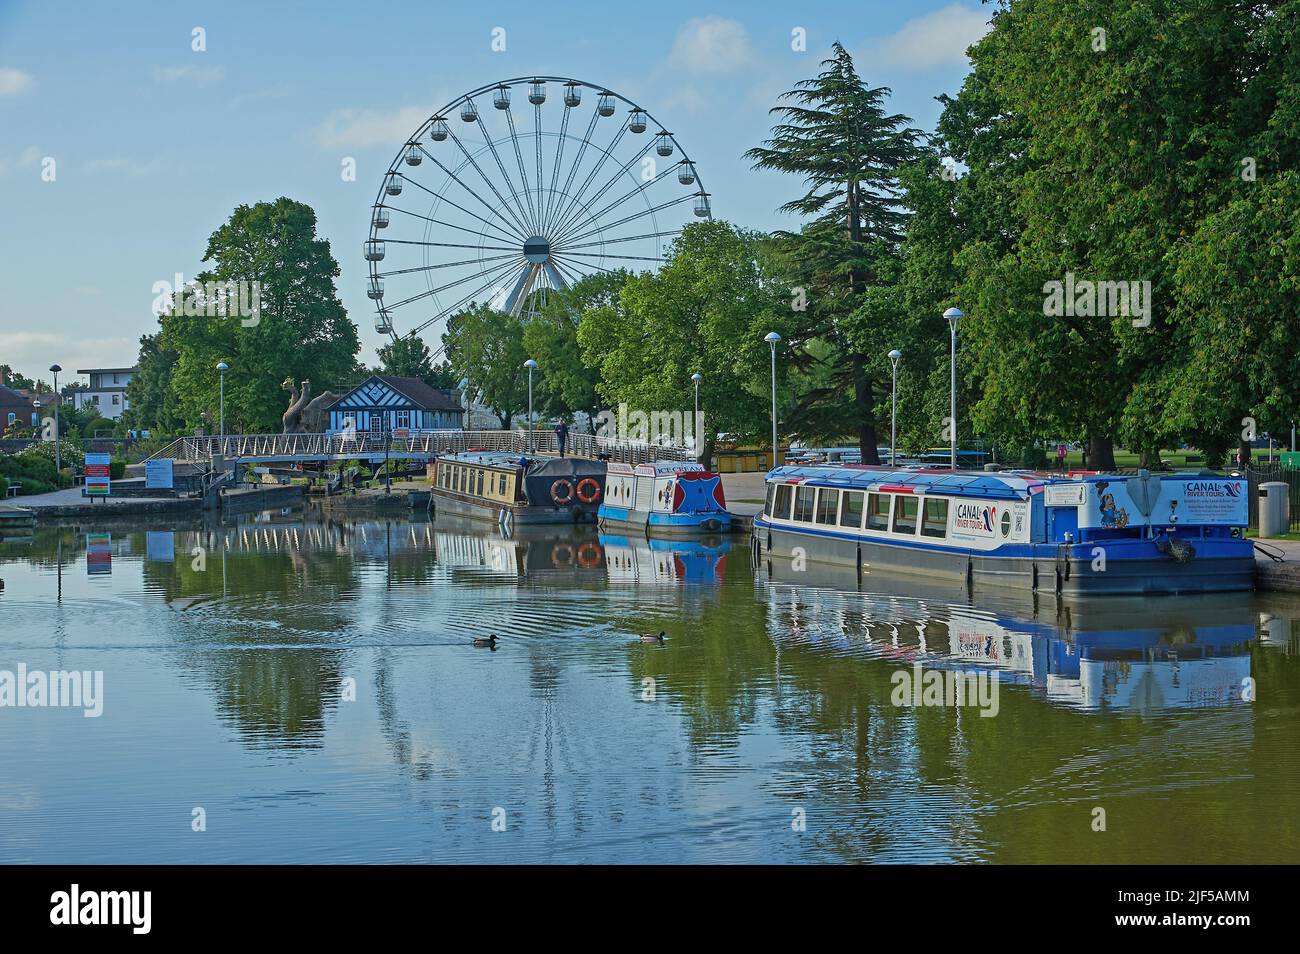 Boats moored in Bancroft Basin, Stratford upon Avon at the start and end of the Stratford on Avon canal Stock Photo